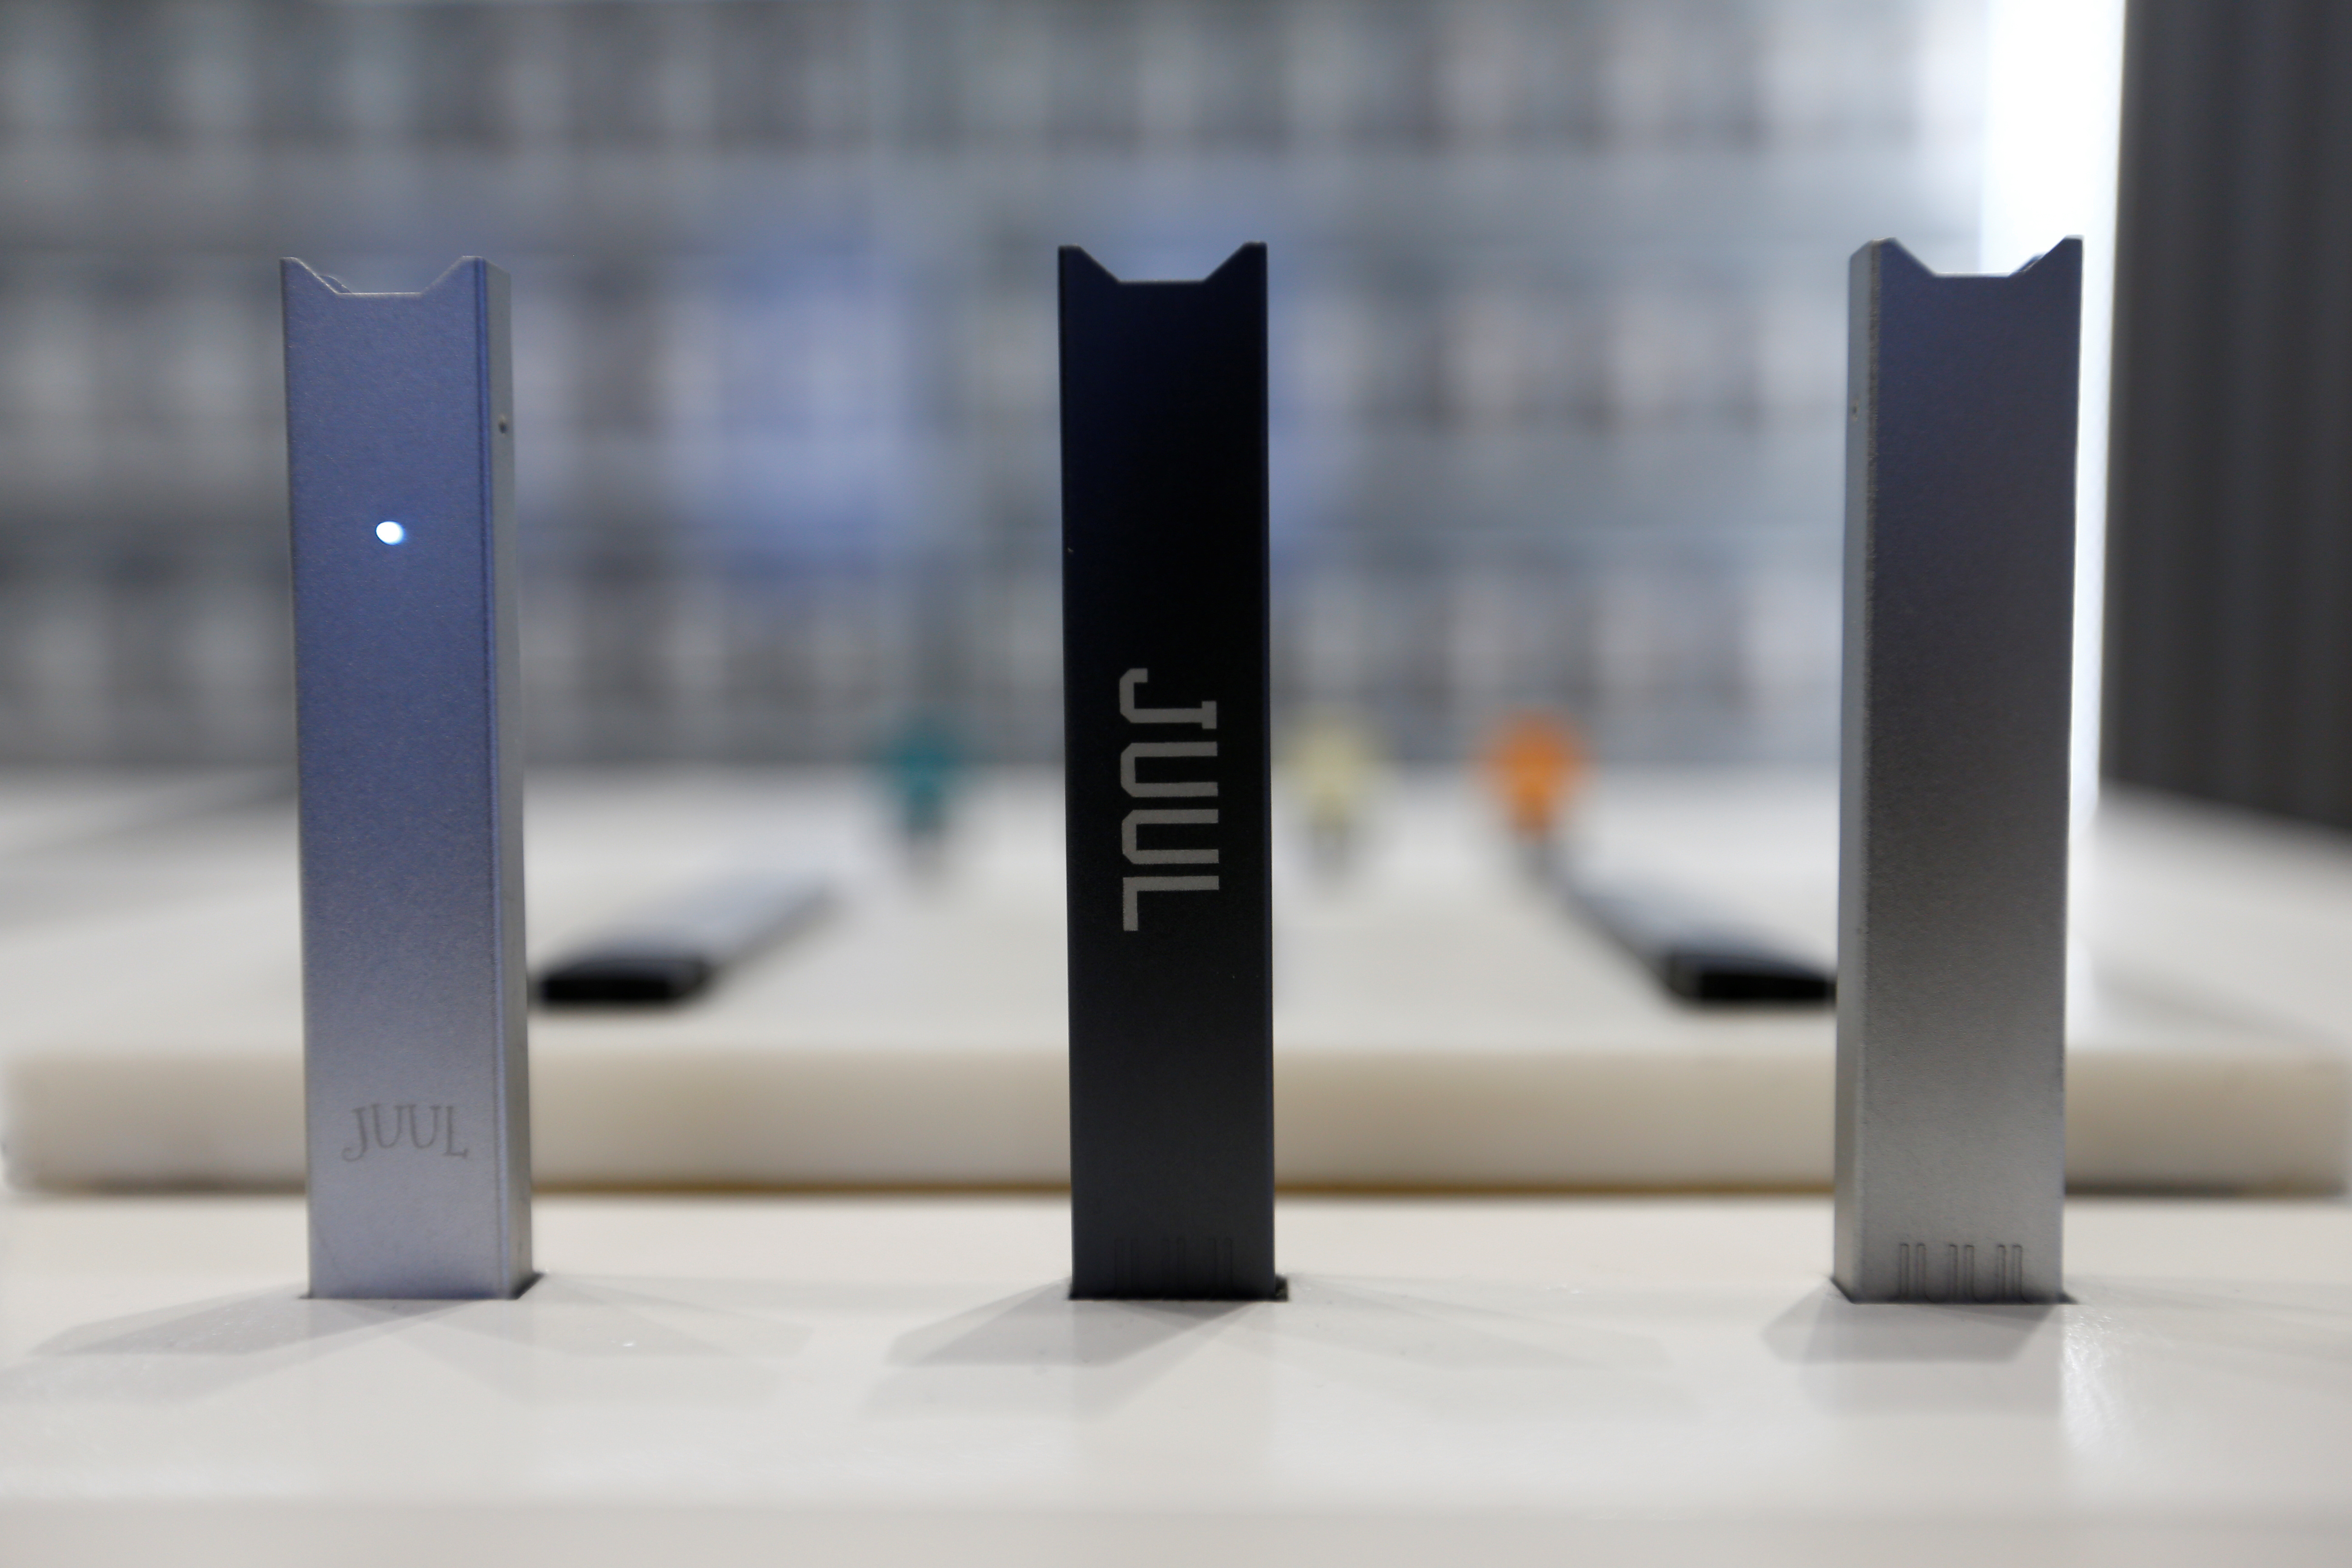 Juul brand vaping pens are displayed for sale at a Juul shop in Jakarta